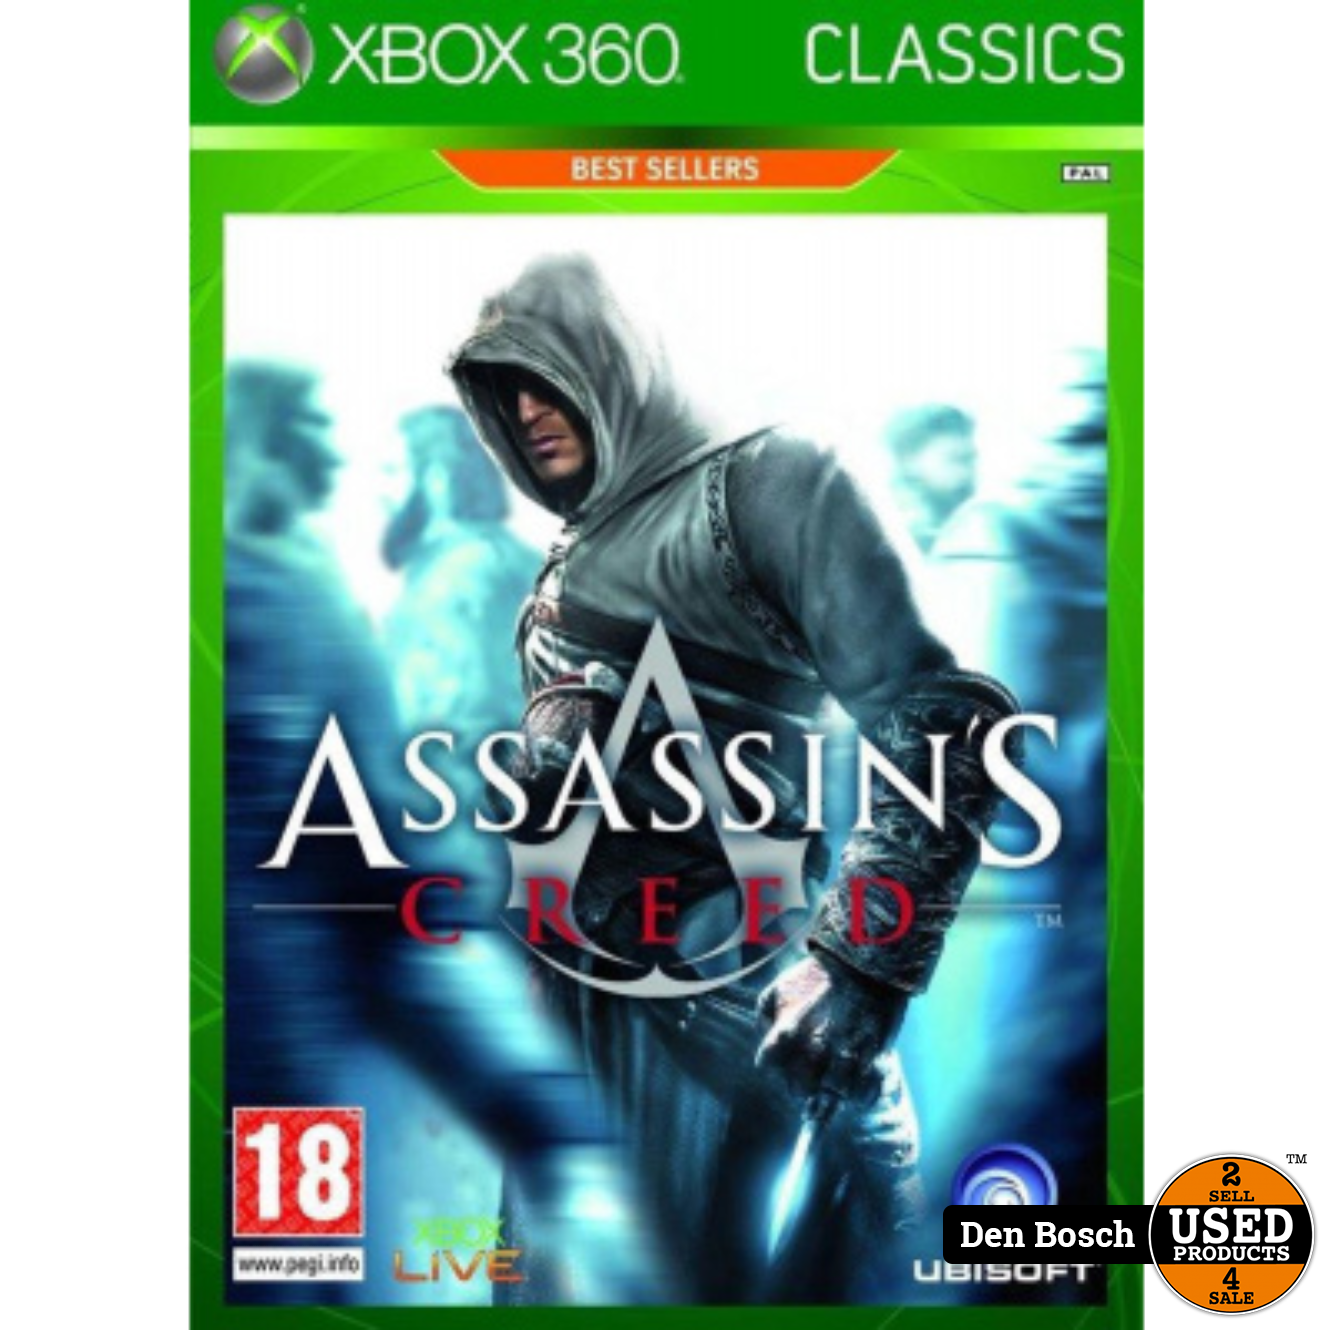 Classics Xbox 360 - Used Products Den Bosch